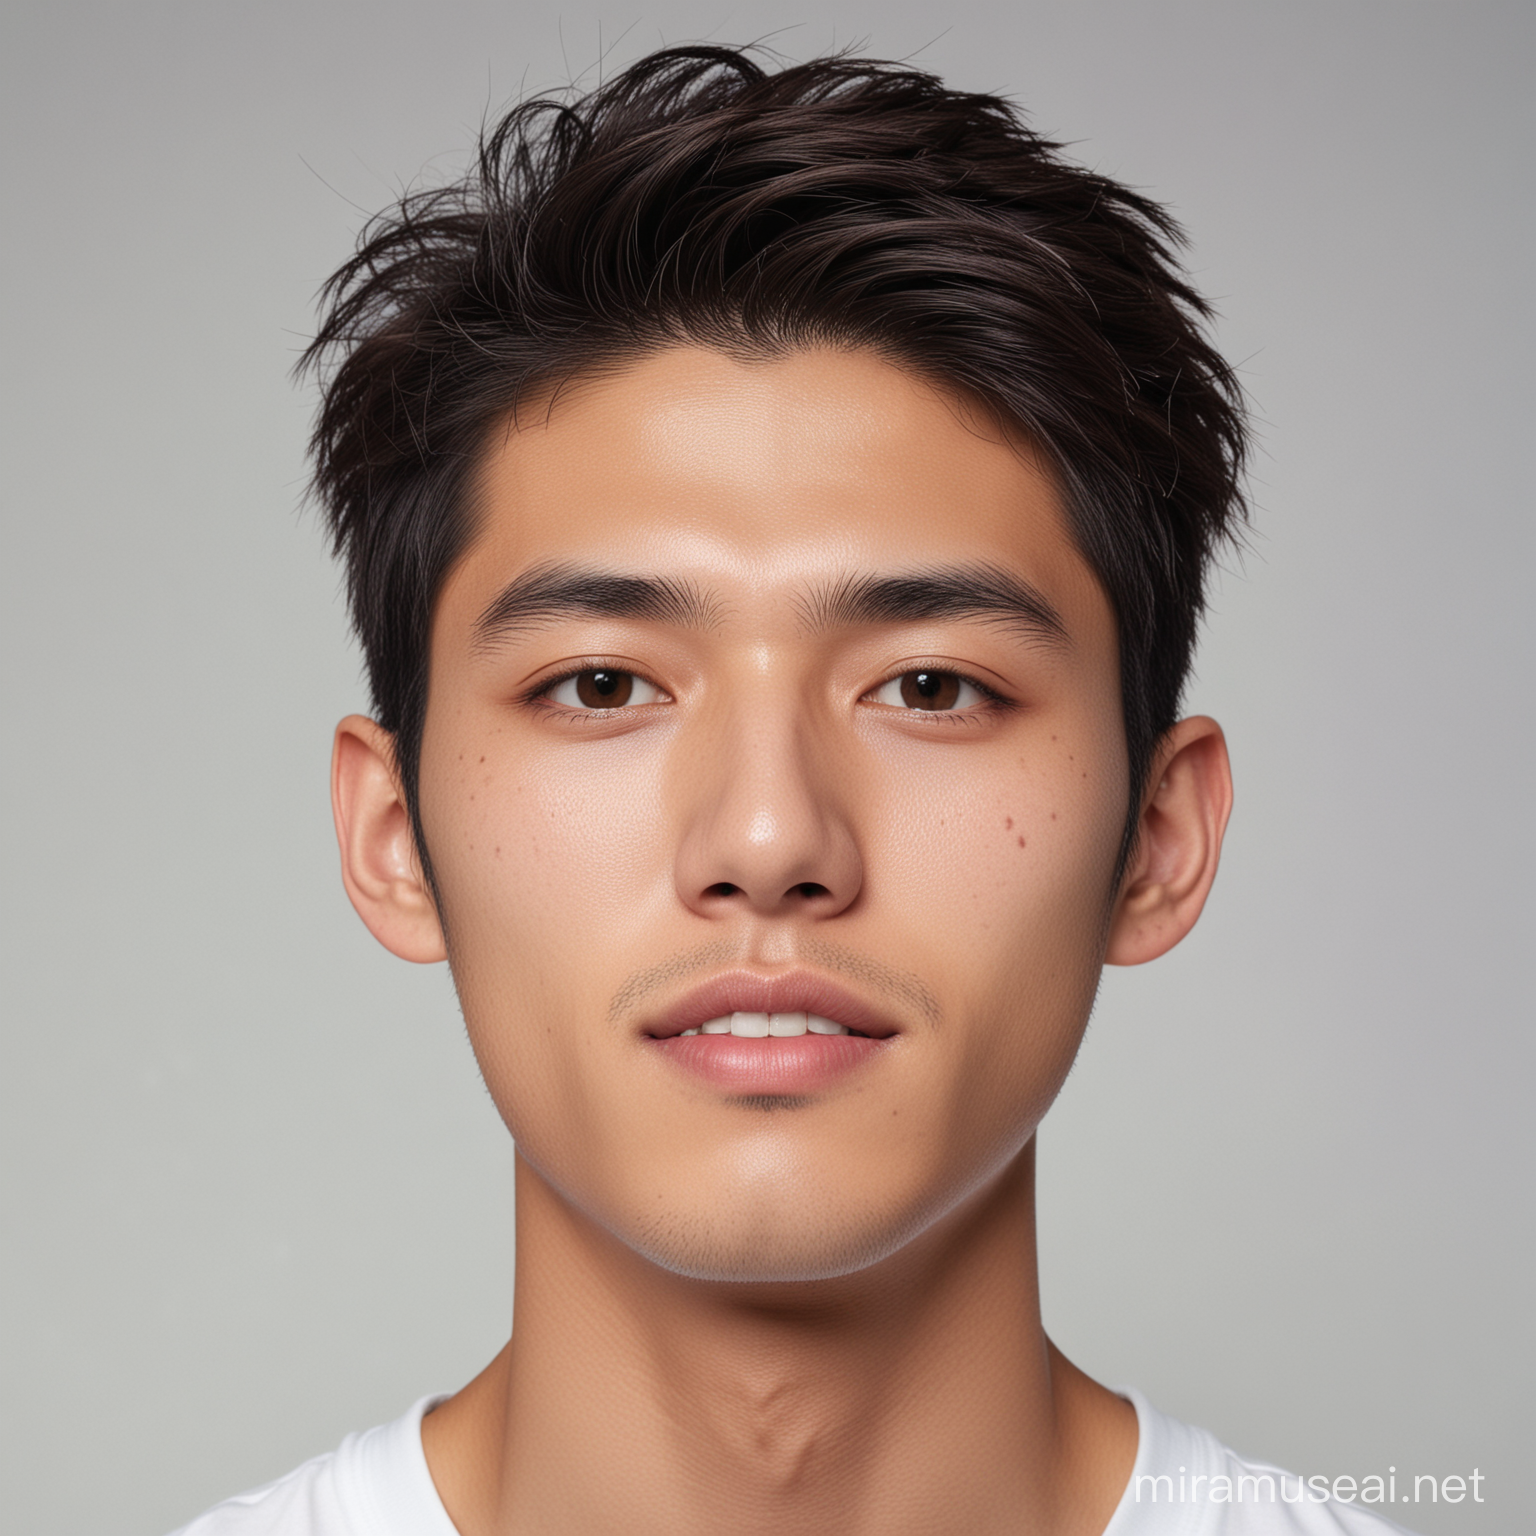 22 yo Japanese man face, shaved, symmetric face, handsome, perfect, HD, 8K, skin texture, square jaw, front view